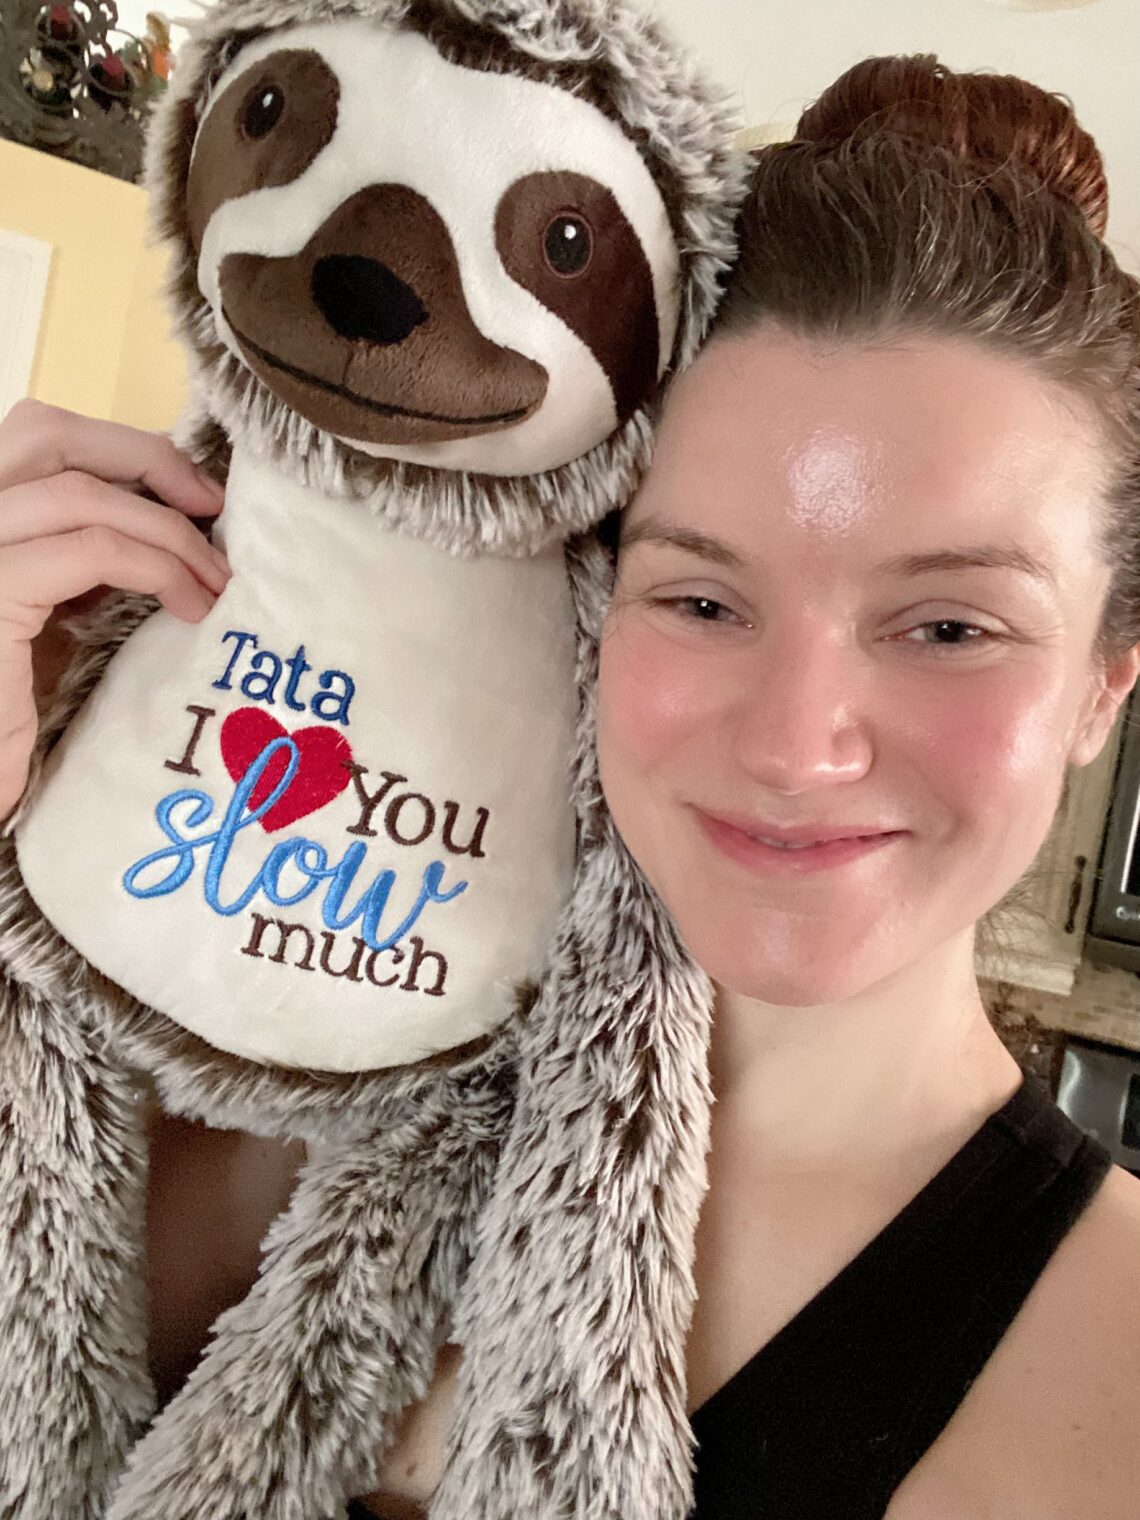 tata sloth with me i love you slow much embroidery